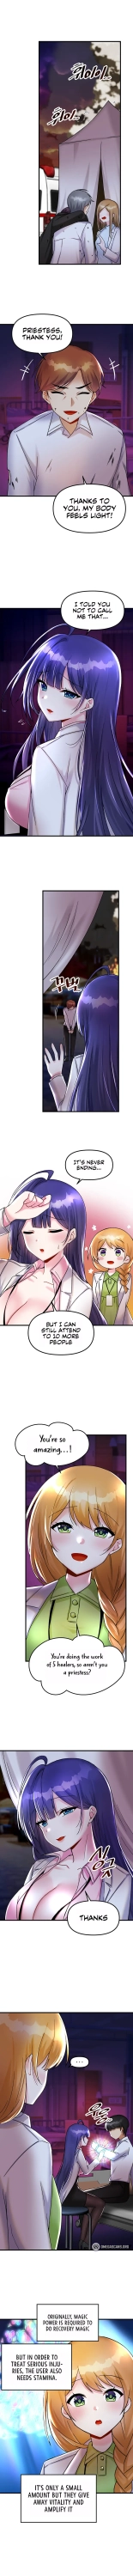 Trapped in the Academy's Eroge : página 225